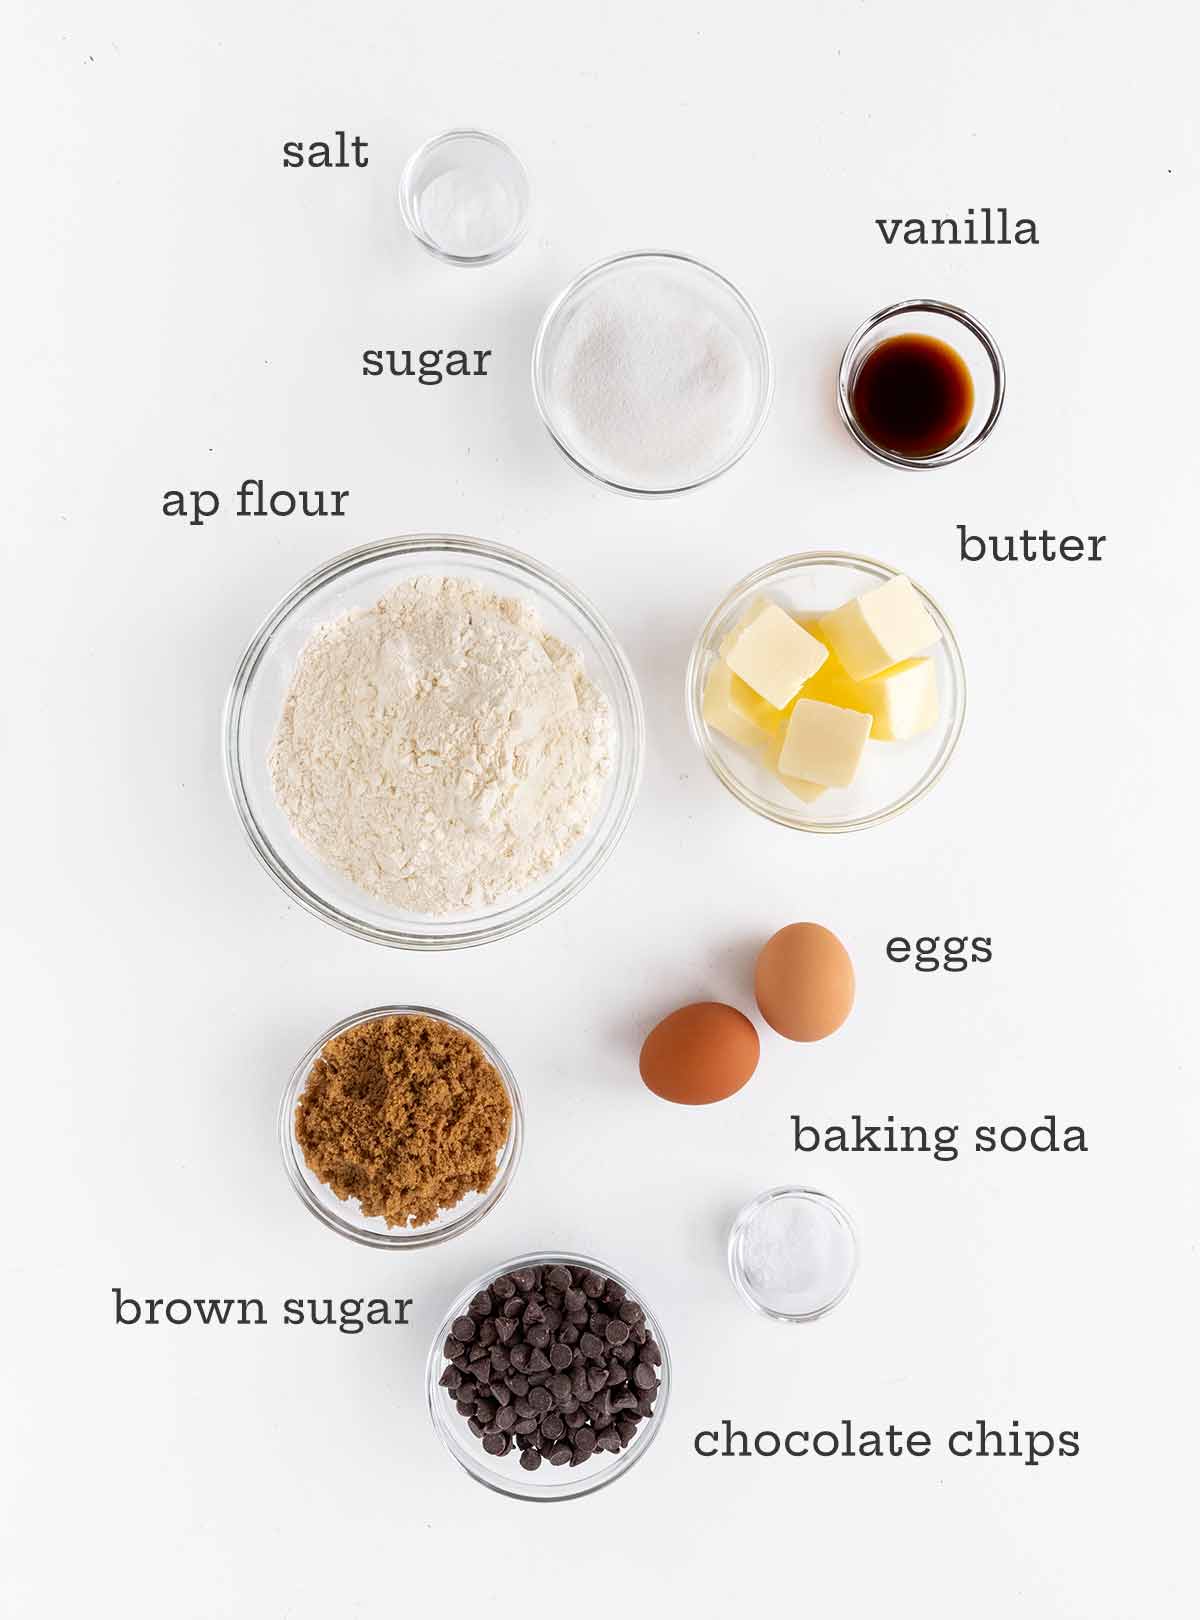 Ingredients for Soft Chocolate Chip Cookies: Flour, butter, eggs, sugar, vanilla, salt, baking powder, and chocolate chips.